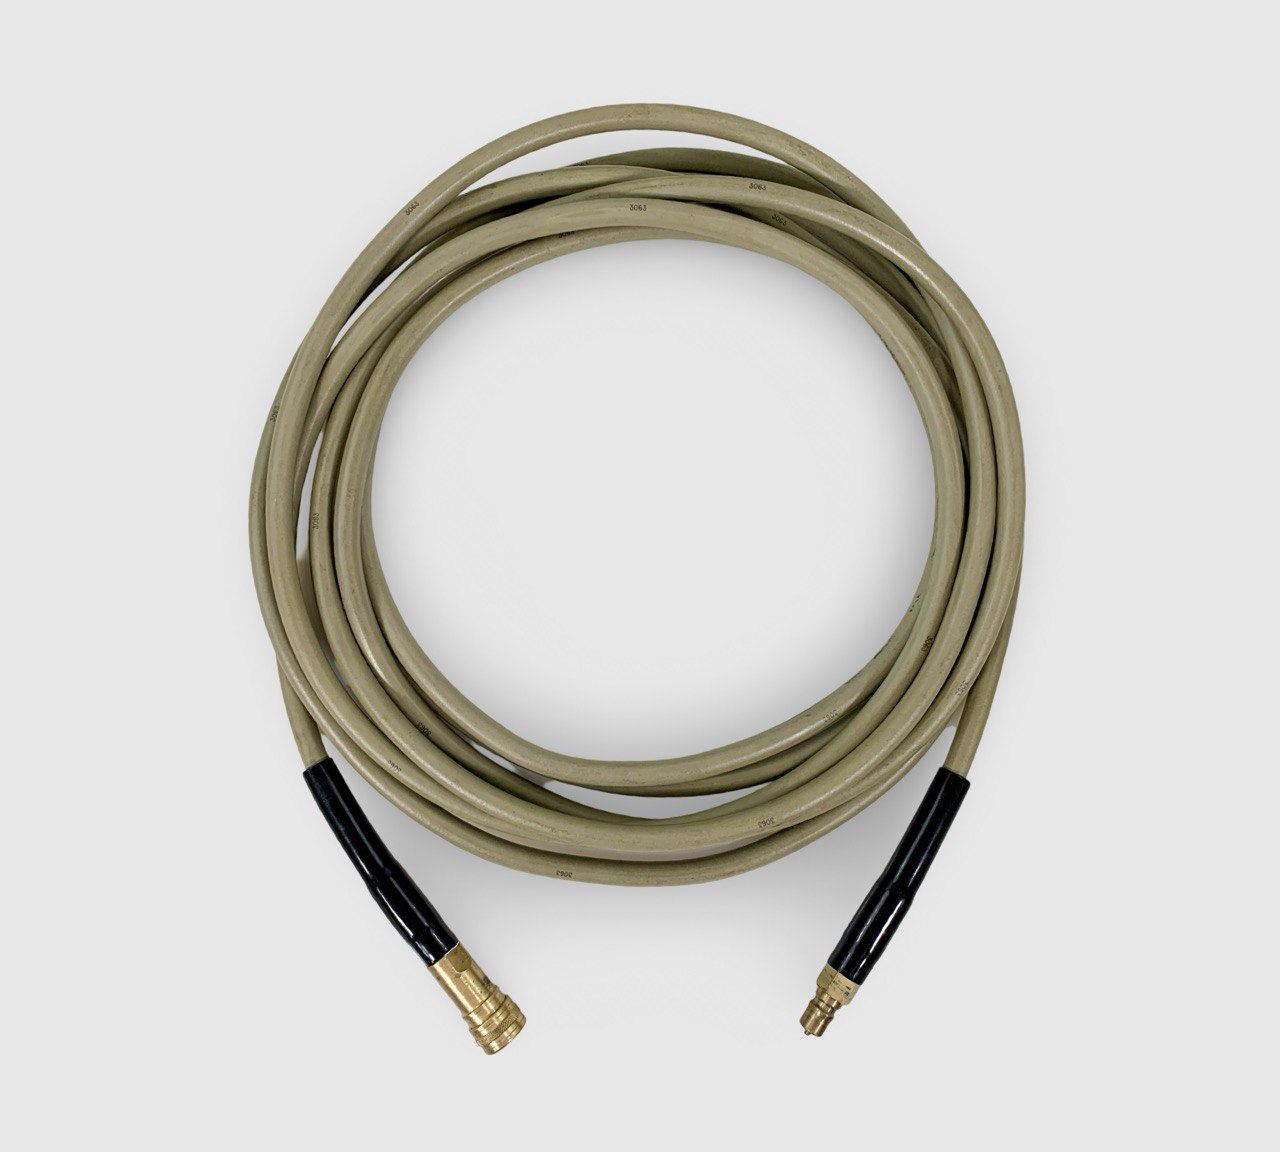 PRE-OWNED 25ft / 7.6m High Pressure GREY Solution Hose ONLY - fitted with Standard MALE & FEMALE Brass Connectors